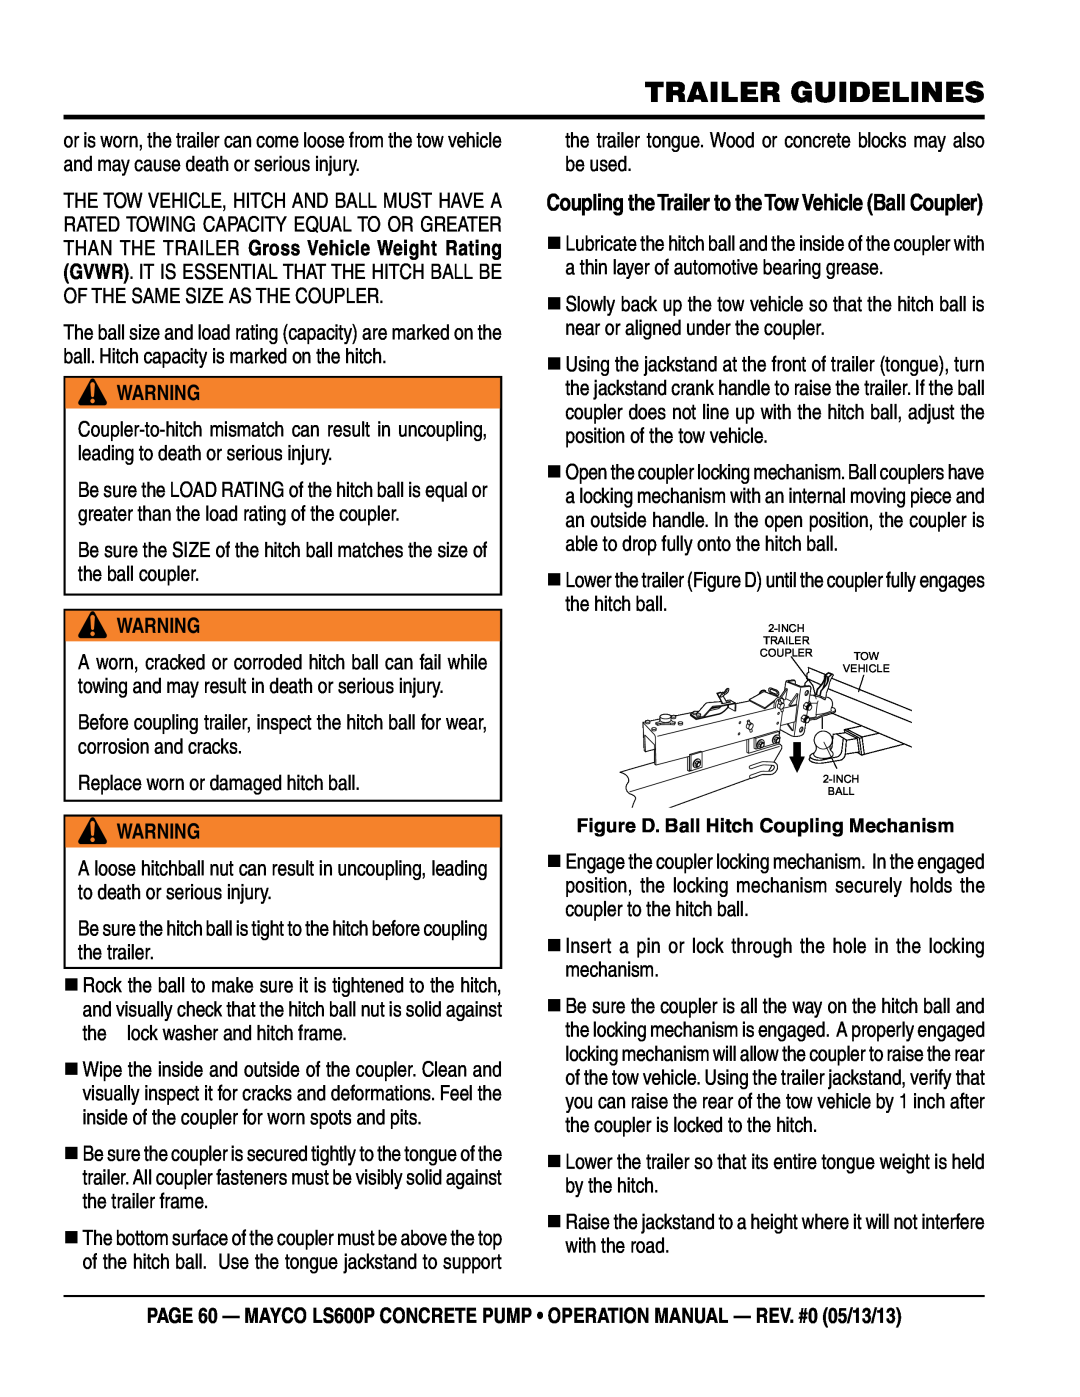 Multiquip LS600P operation manual trailer guidelines, Replace worn or damaged hitch ball 